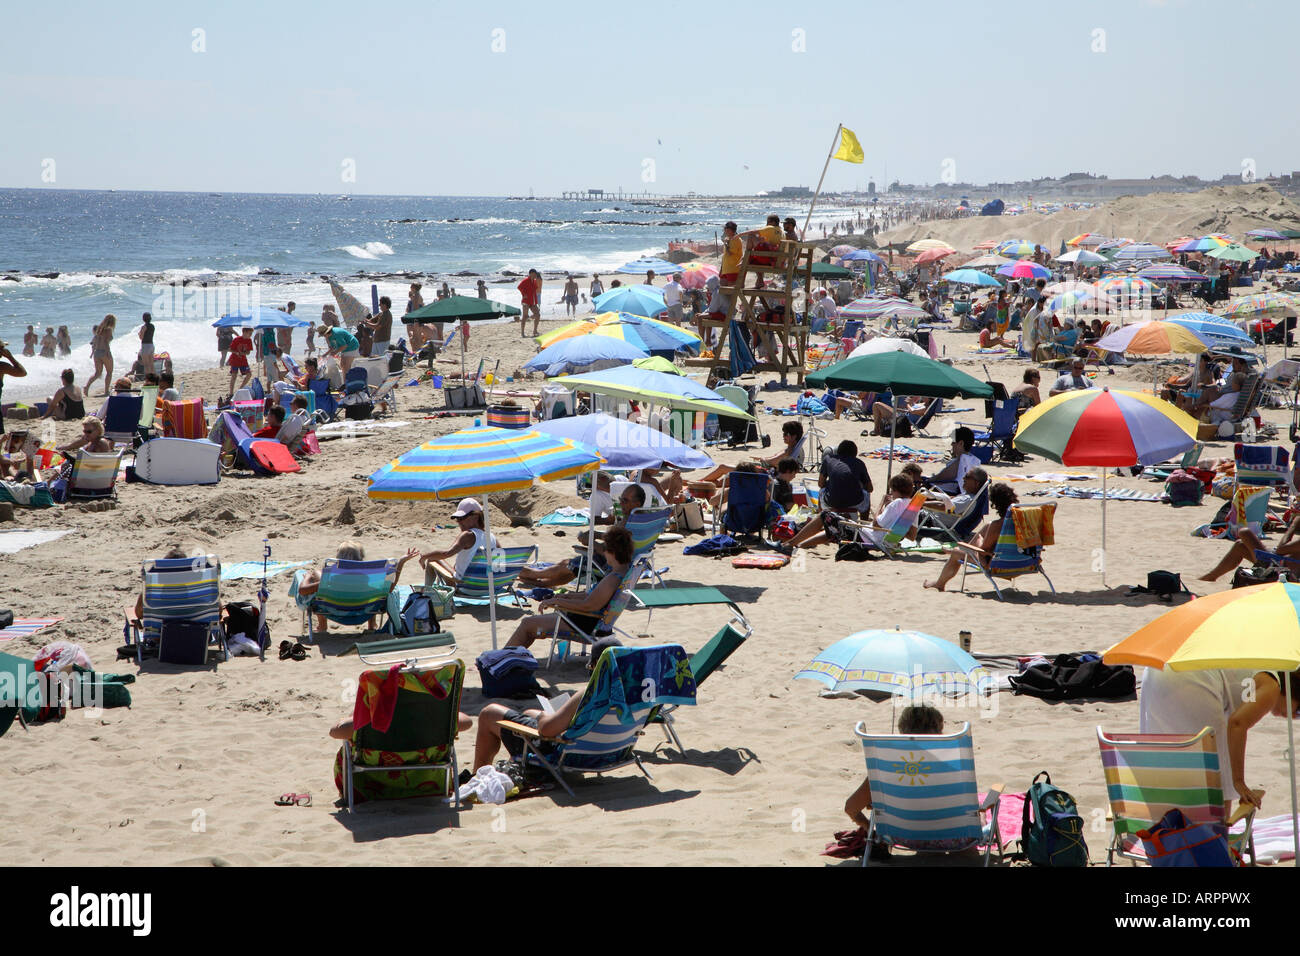 Sandy beach with groups of people with chairs, towels, colorful beach umbrellas clustered around lifeguard tower Stock Photo